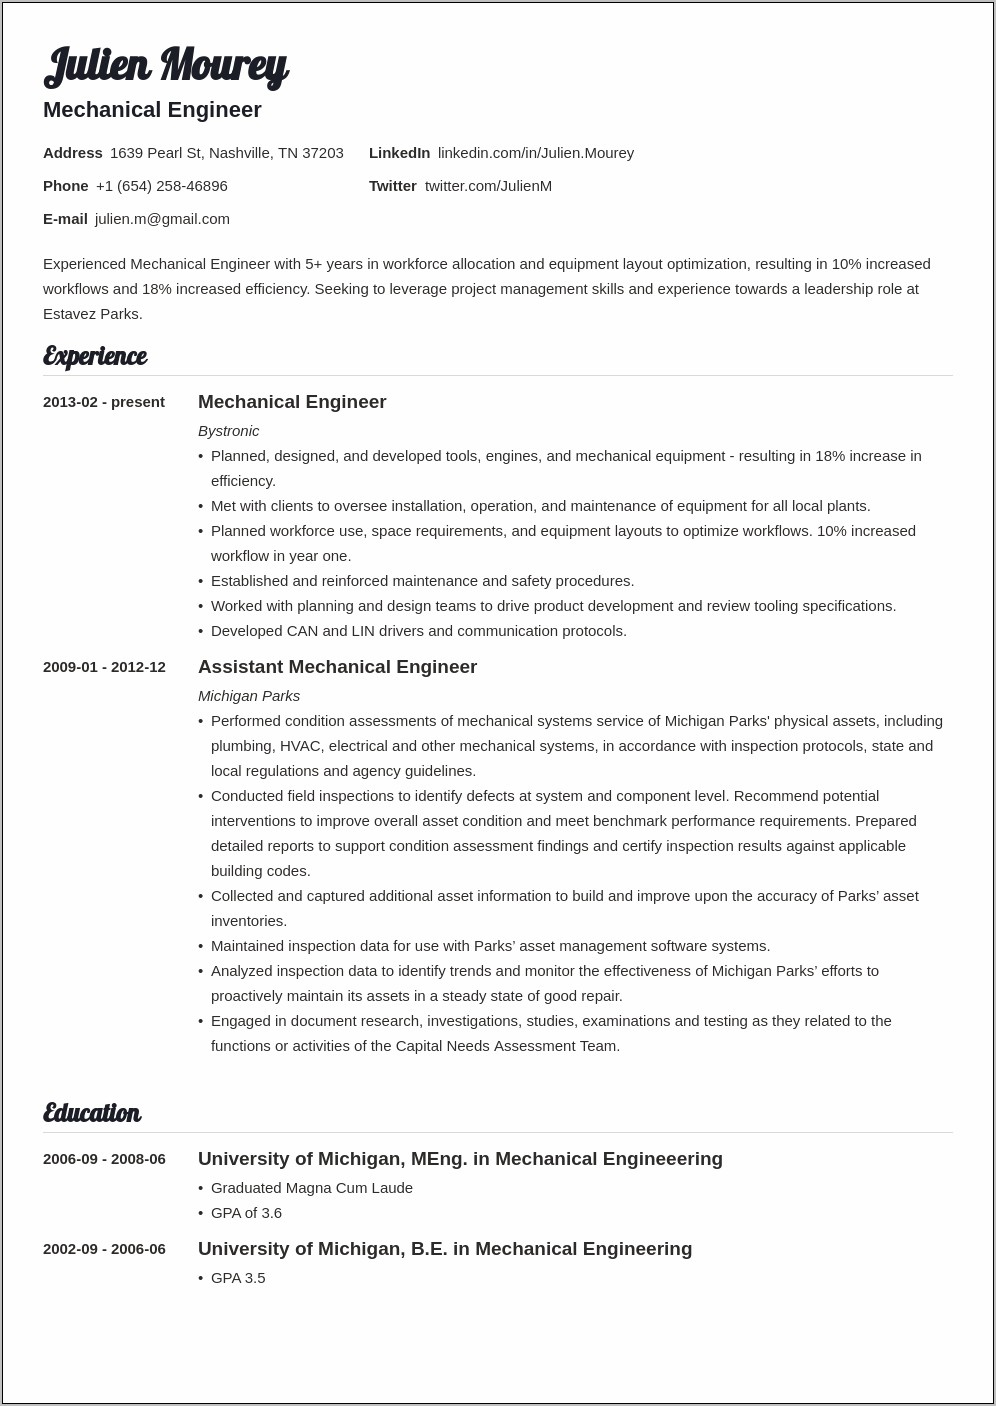 Resume Format For Mechanical Engineer With No Experience